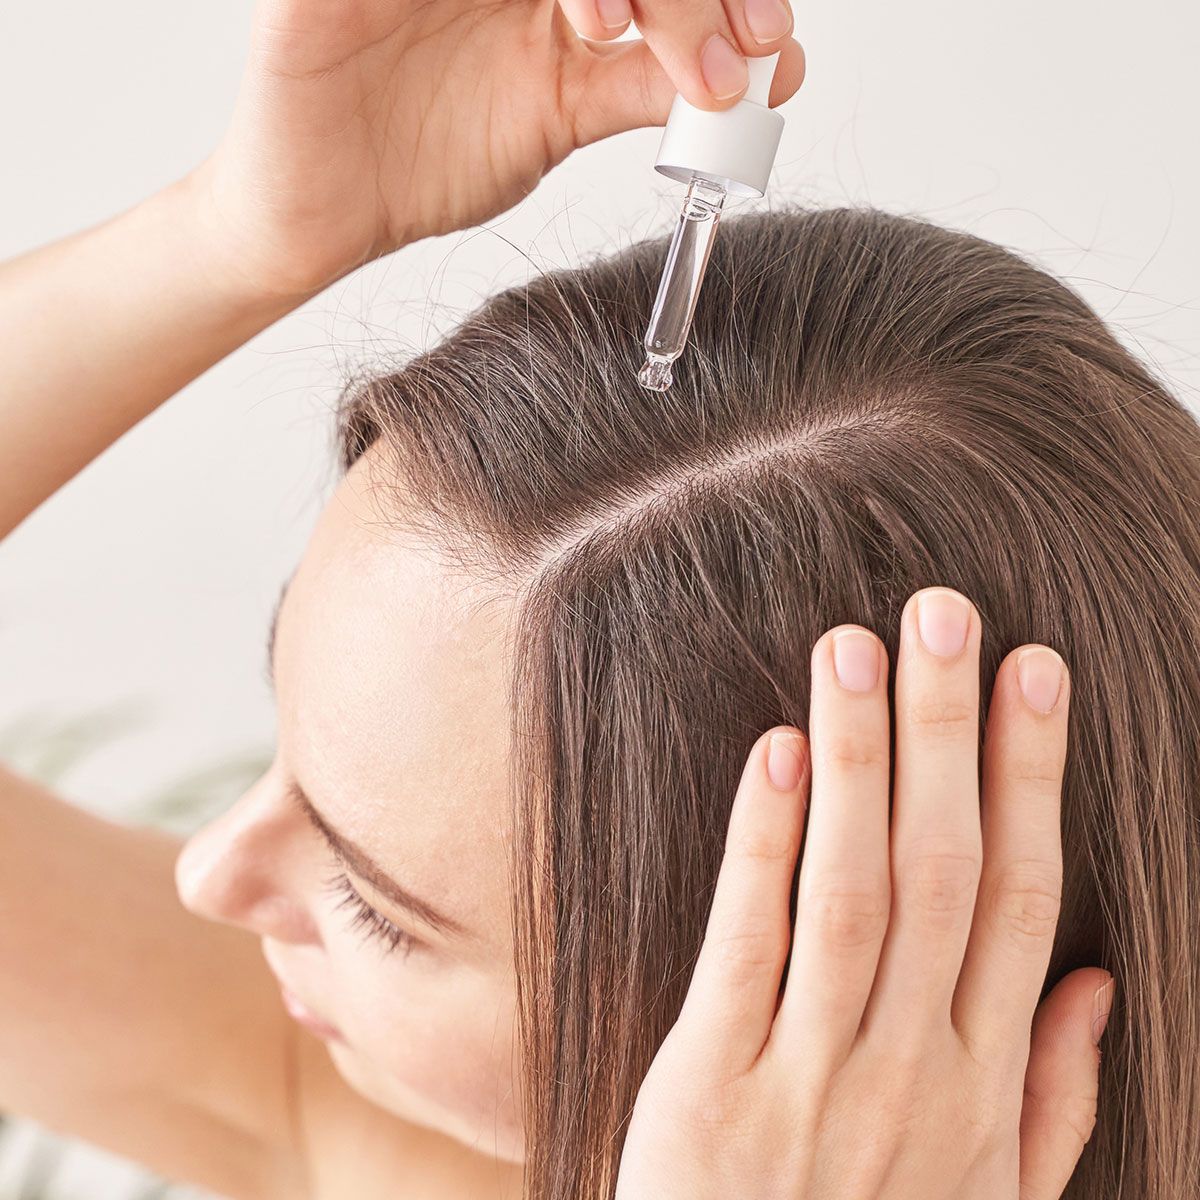 Hair Experts Swear By These 3 Serums To Boost Volume And Thickness